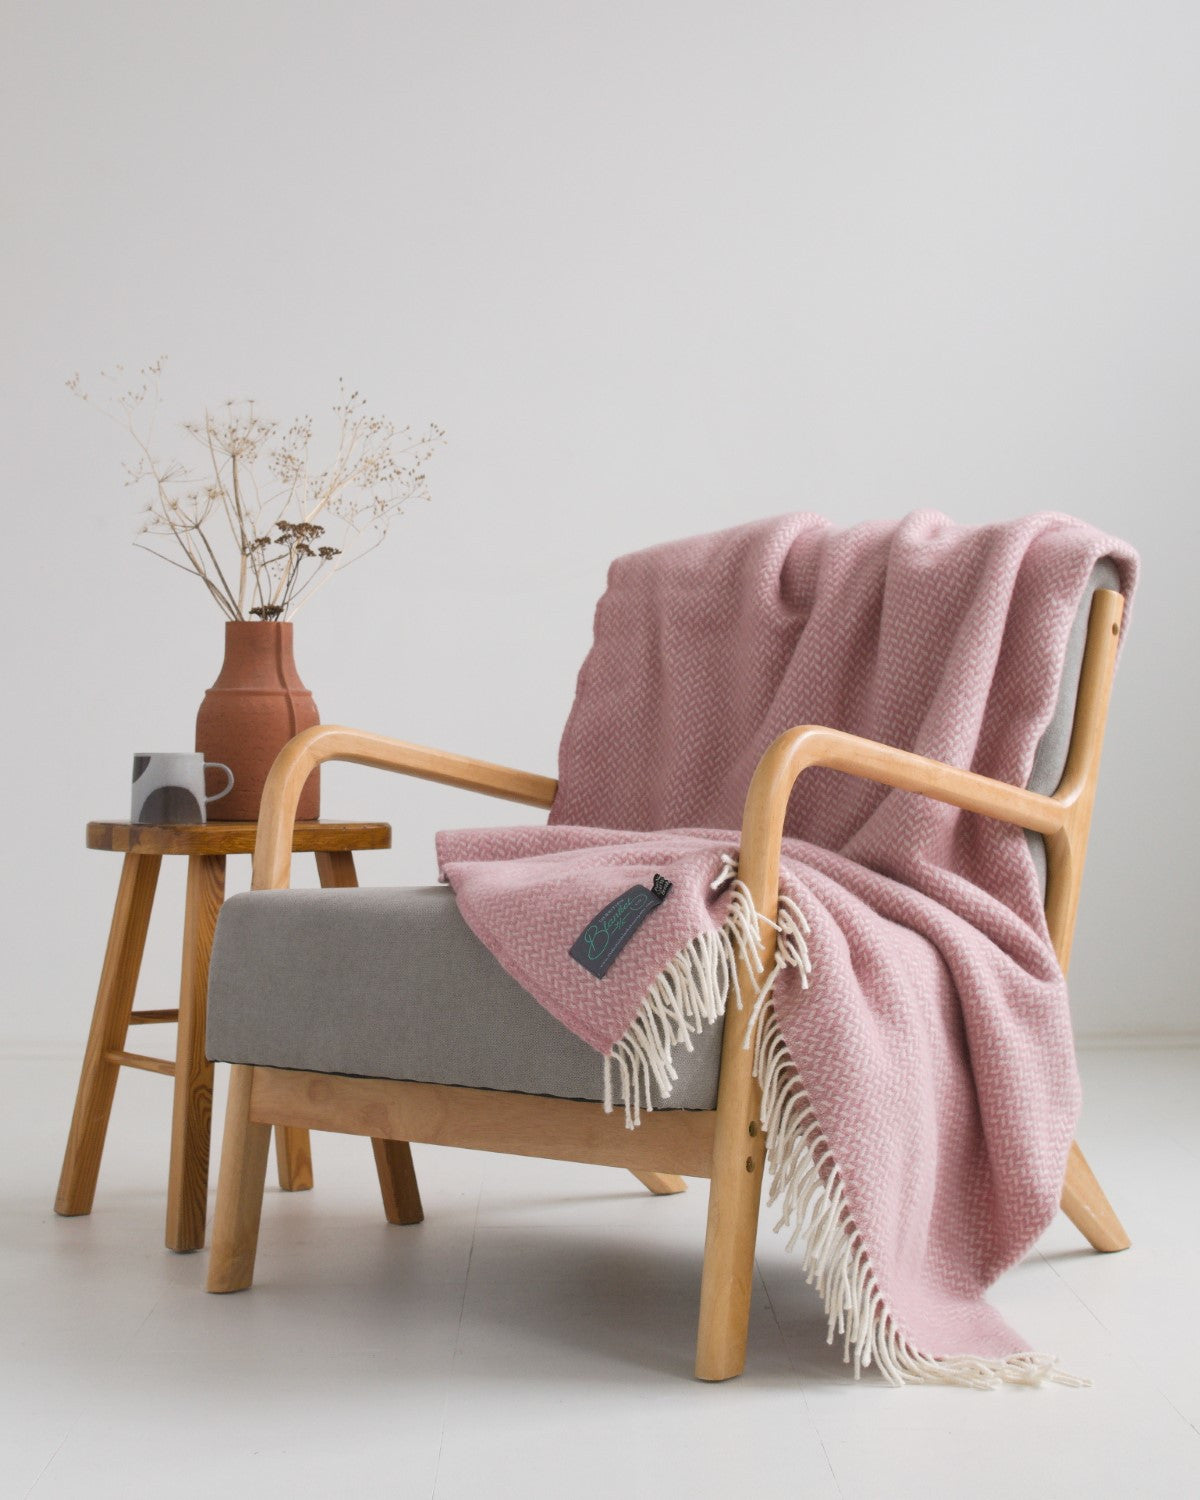 Extra large pink herringbone wool blanket draped over a lounge chair